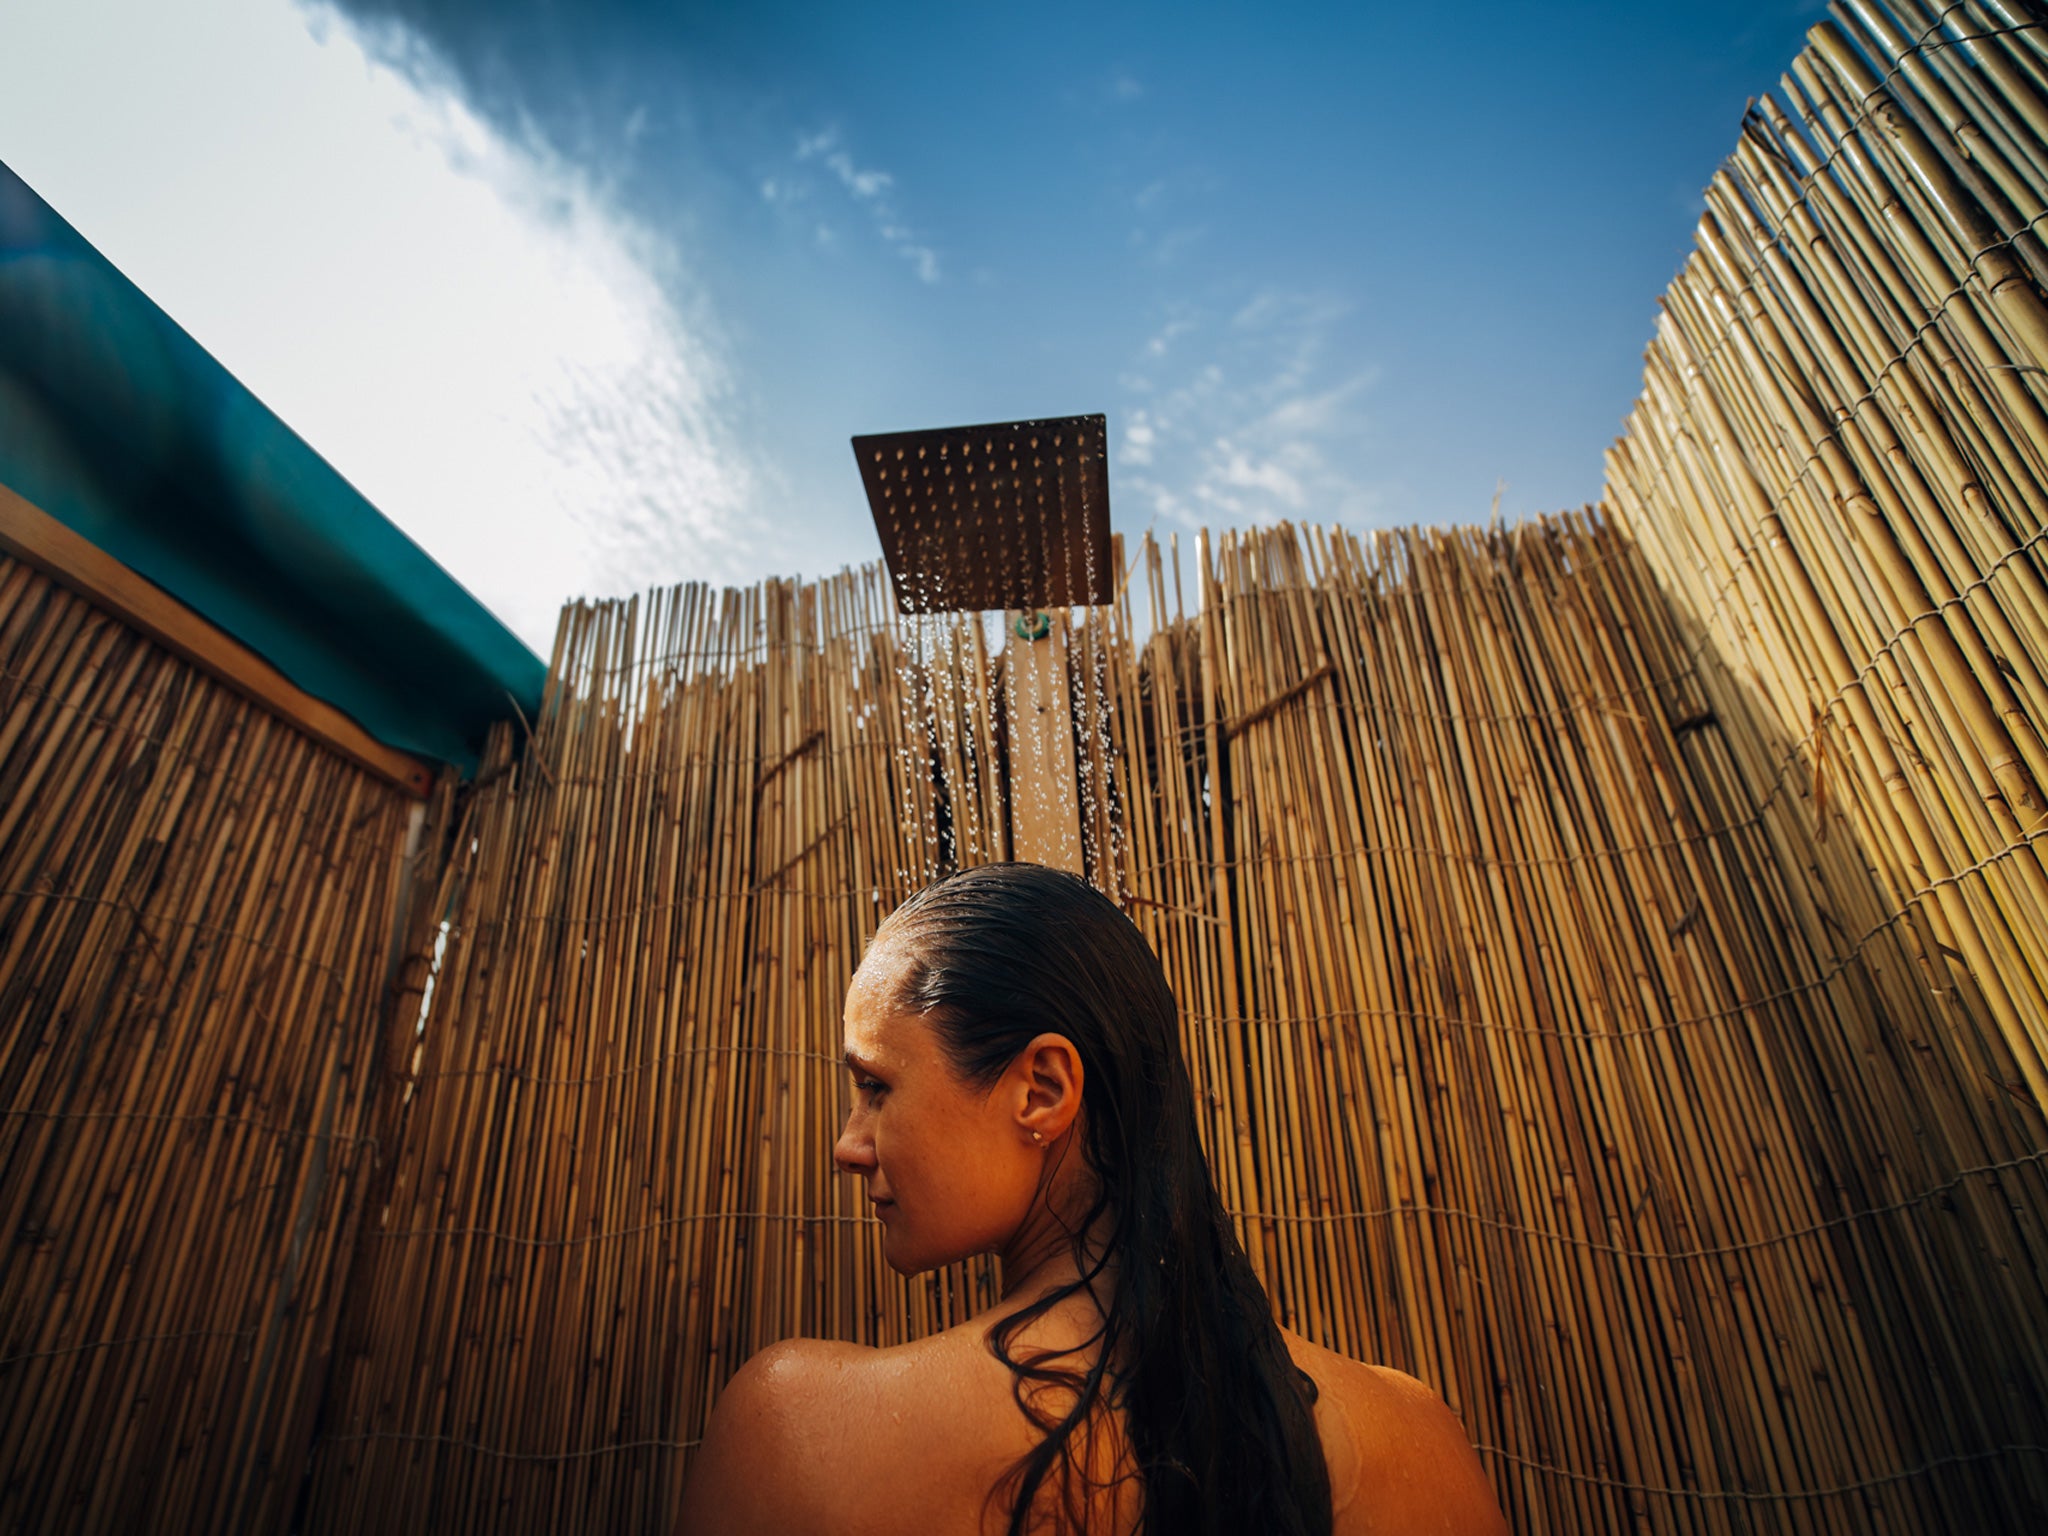 The open-air shower in one of the cabins’ en-suite bathroom